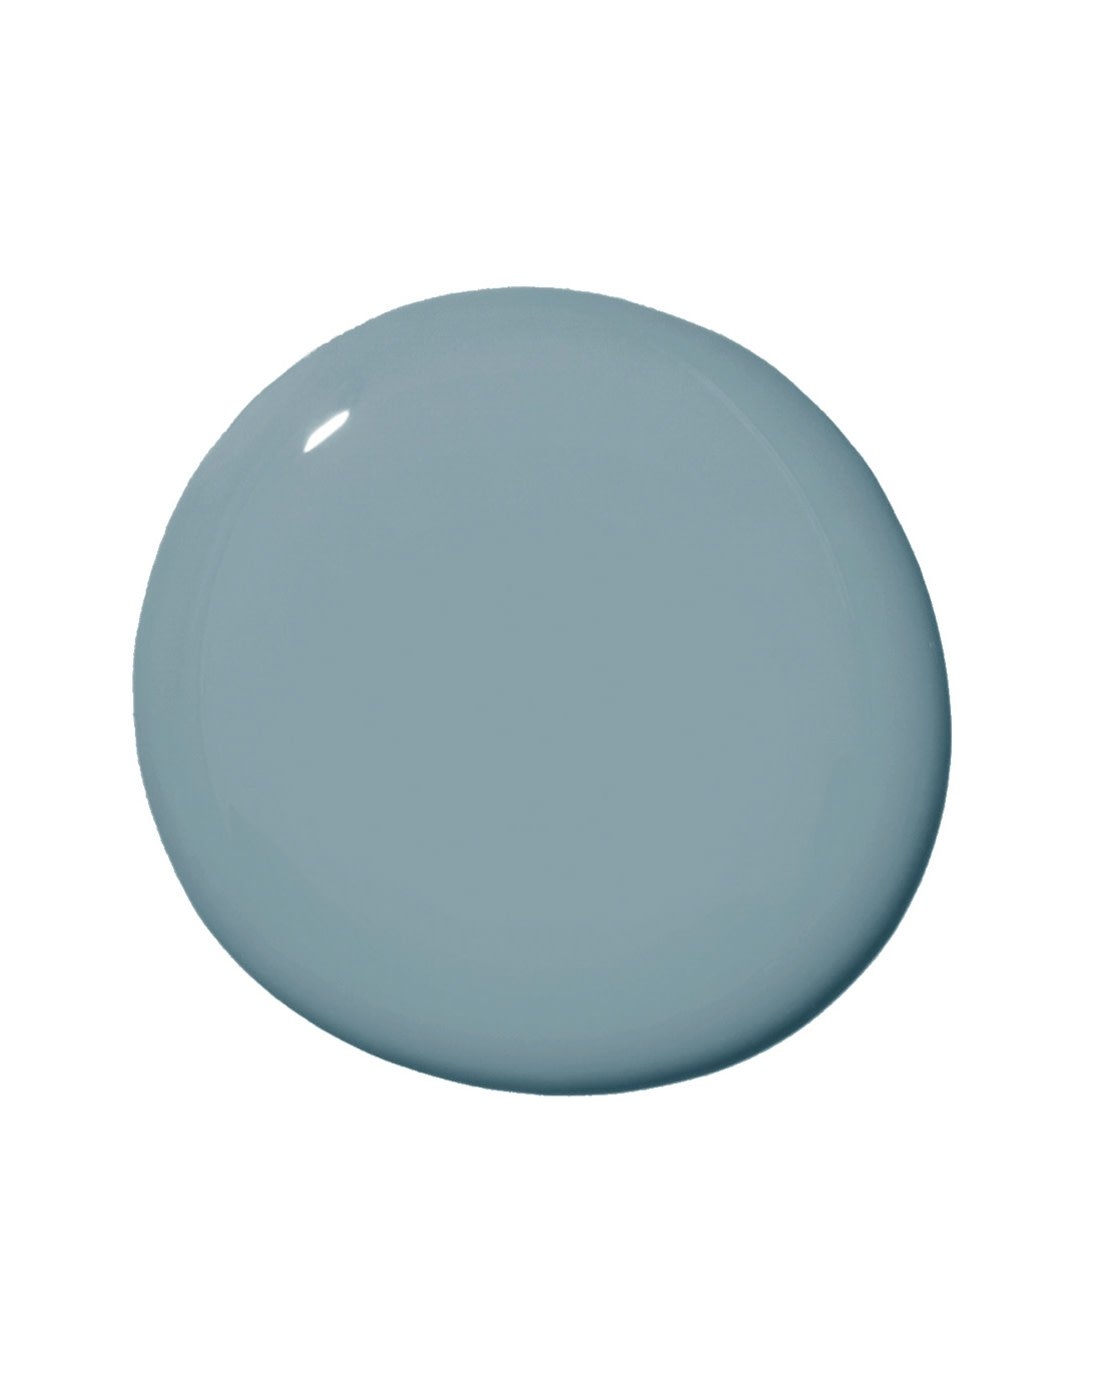 Clare Paint - Good Jeans - Wall Swatch - Image 0